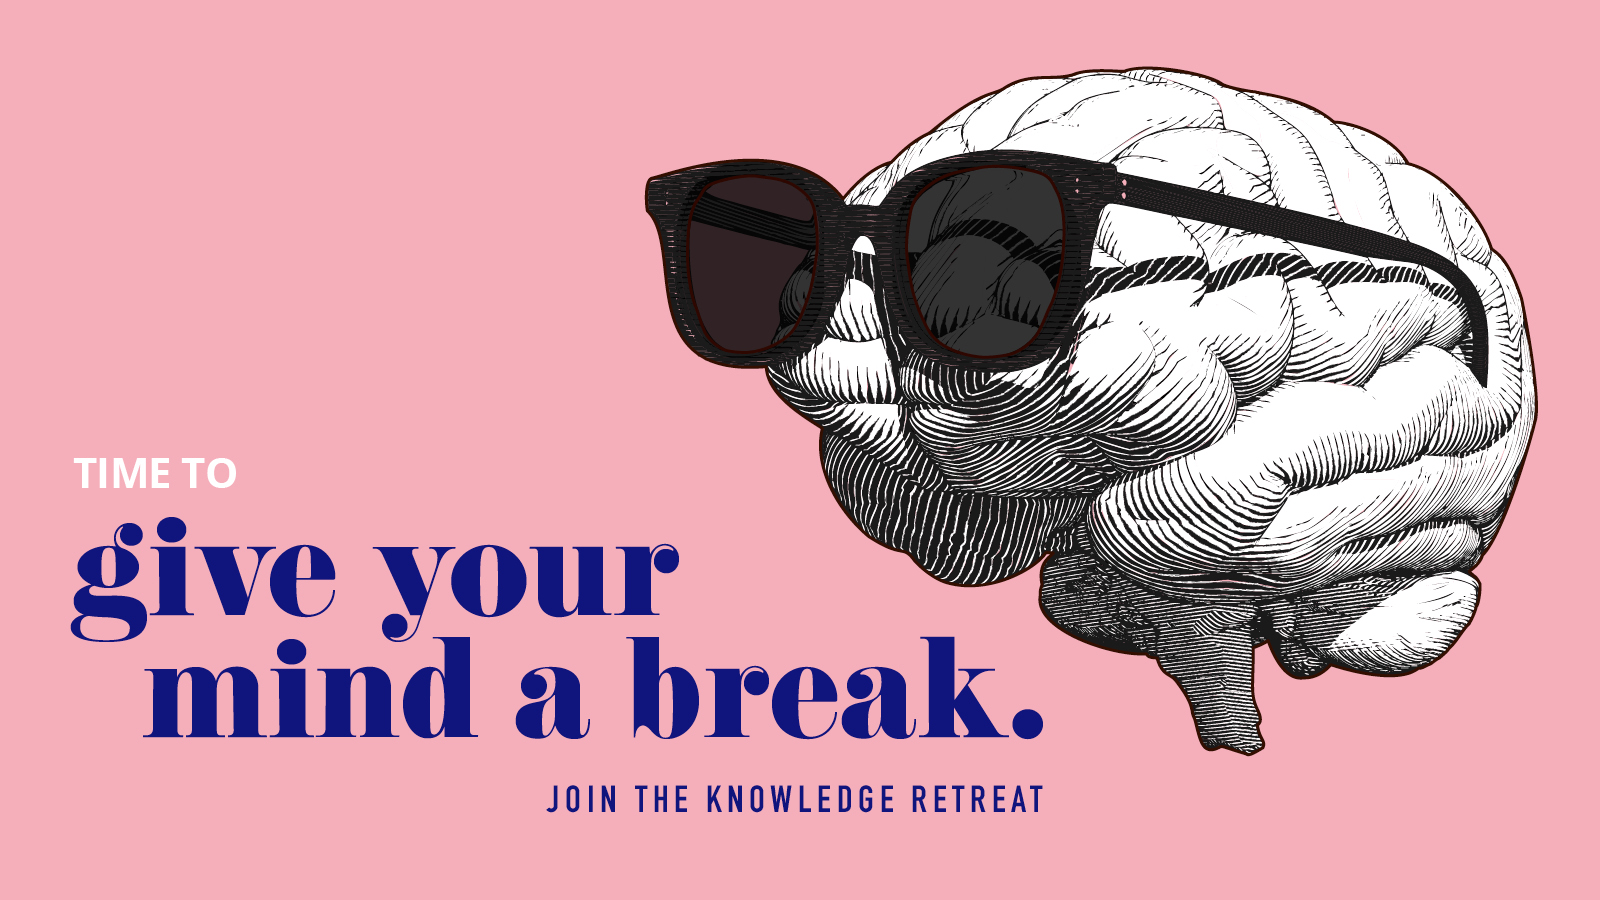 Brain wearing sunglasses with wording 'give your mind a break'